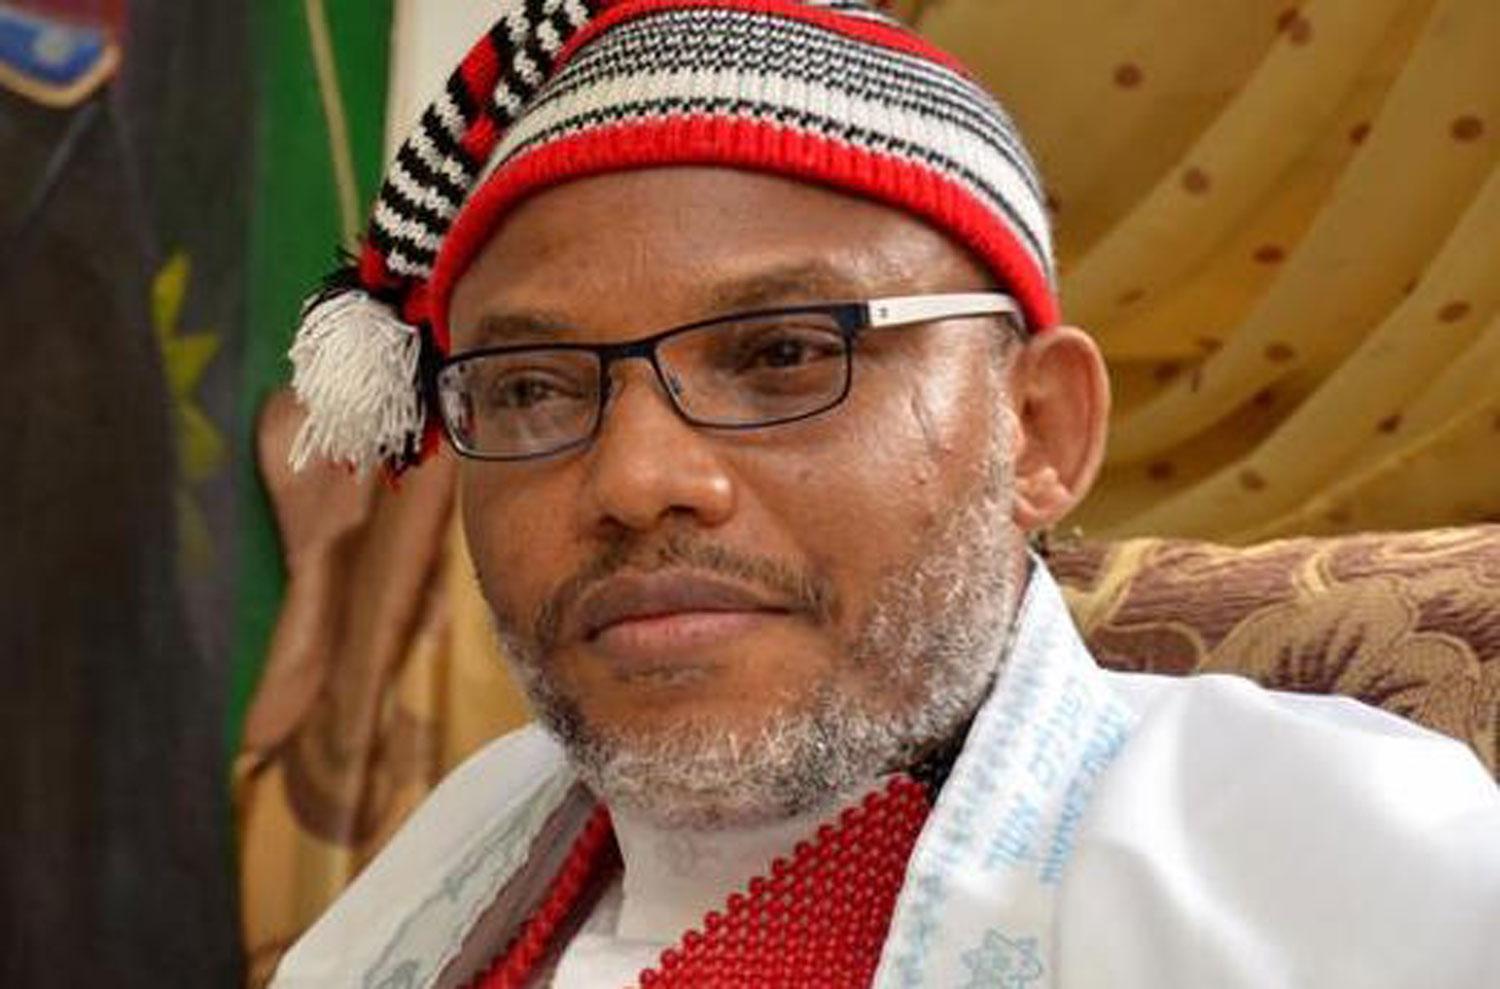 British High Commission Replied Nnamdi Kanu's Letter, Pledges Consular Protection—Lawyer